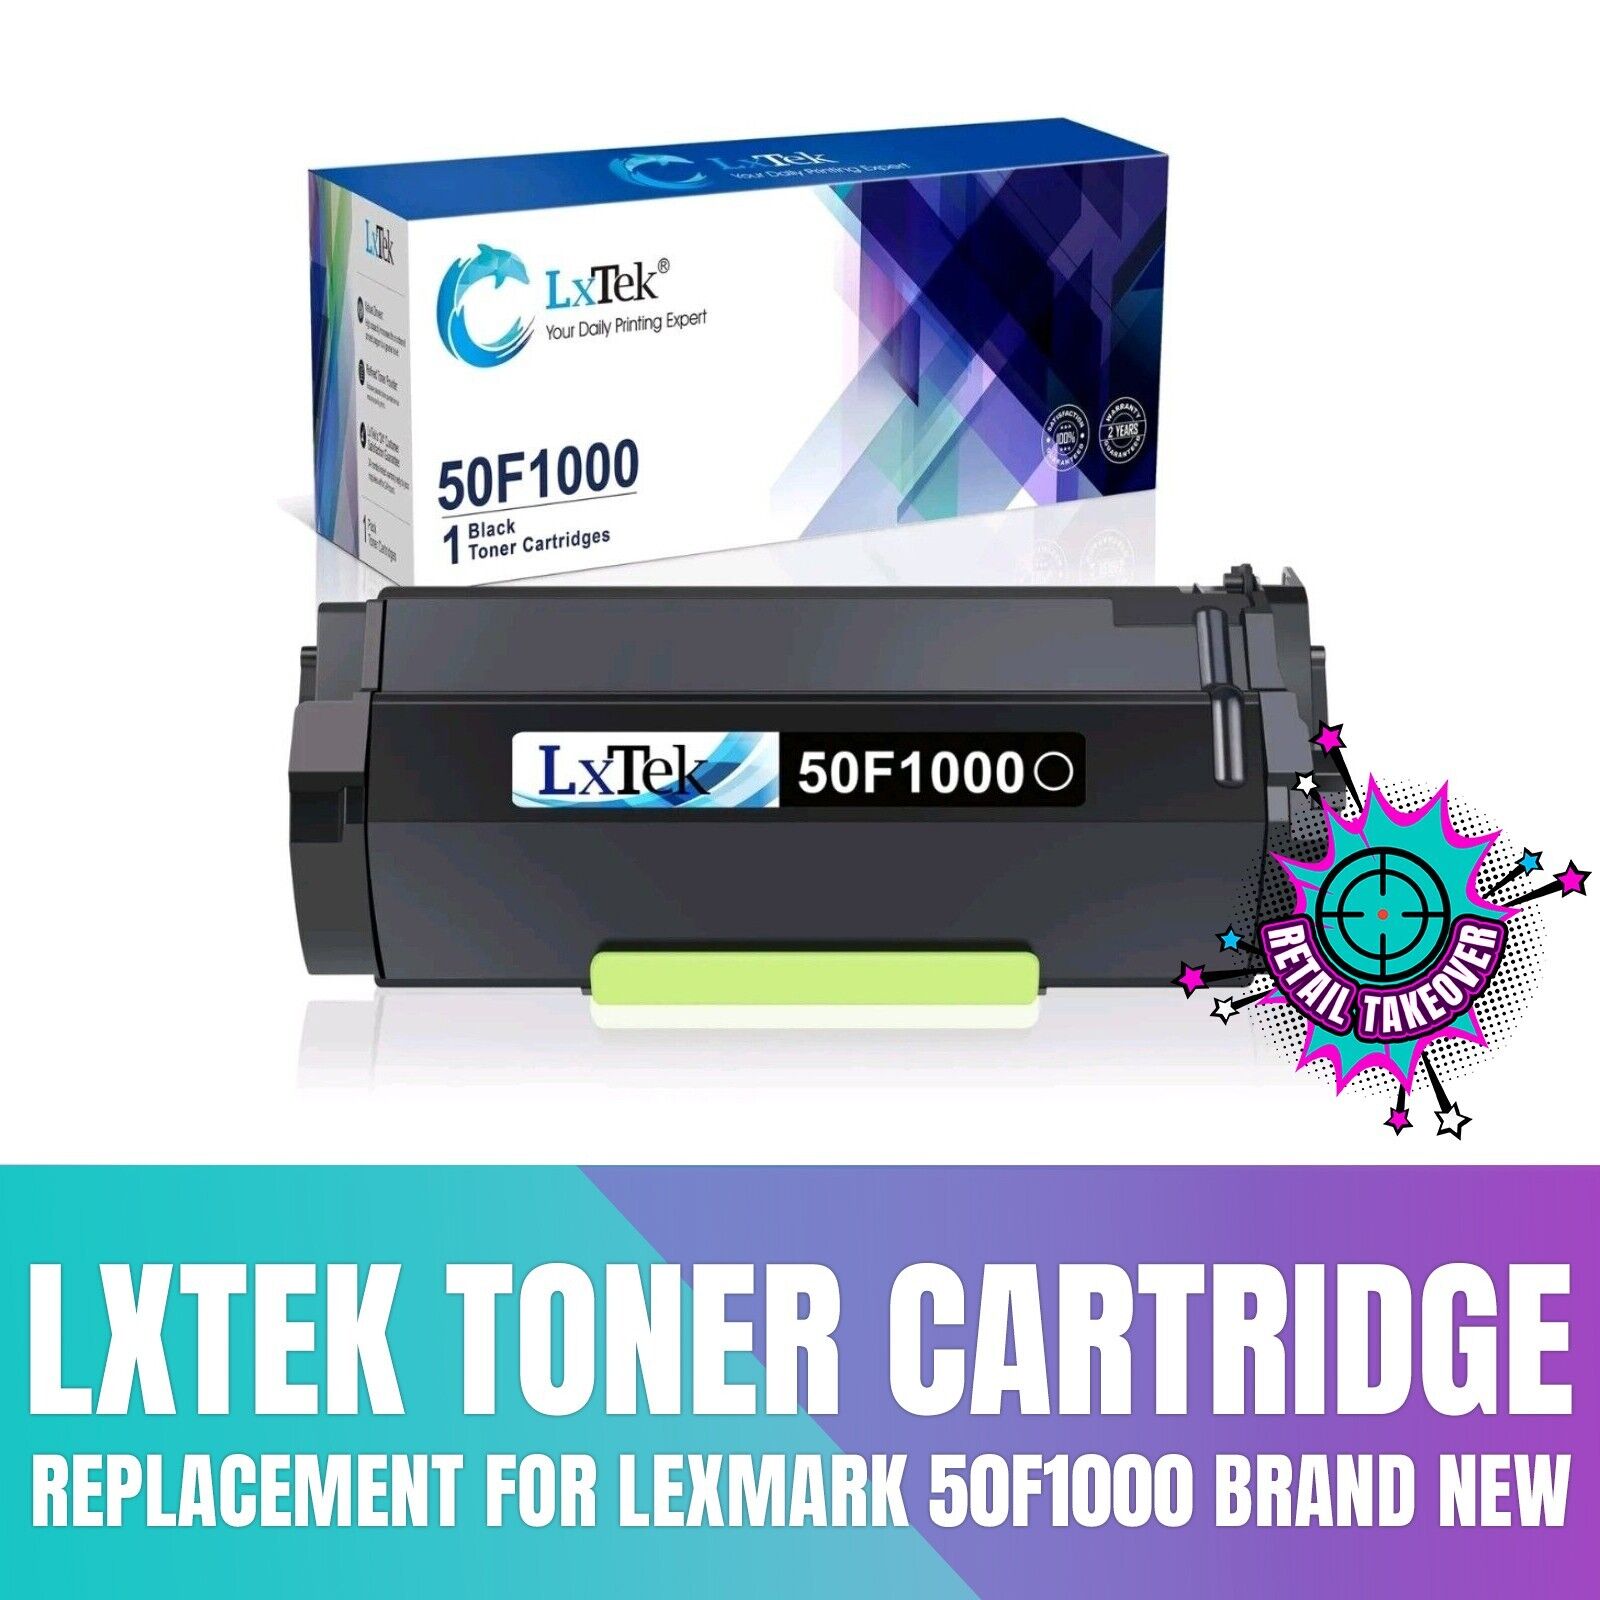 LxTek Compatible Toner Cartridge Replacement for Lexmark 50F1000 Brand New 